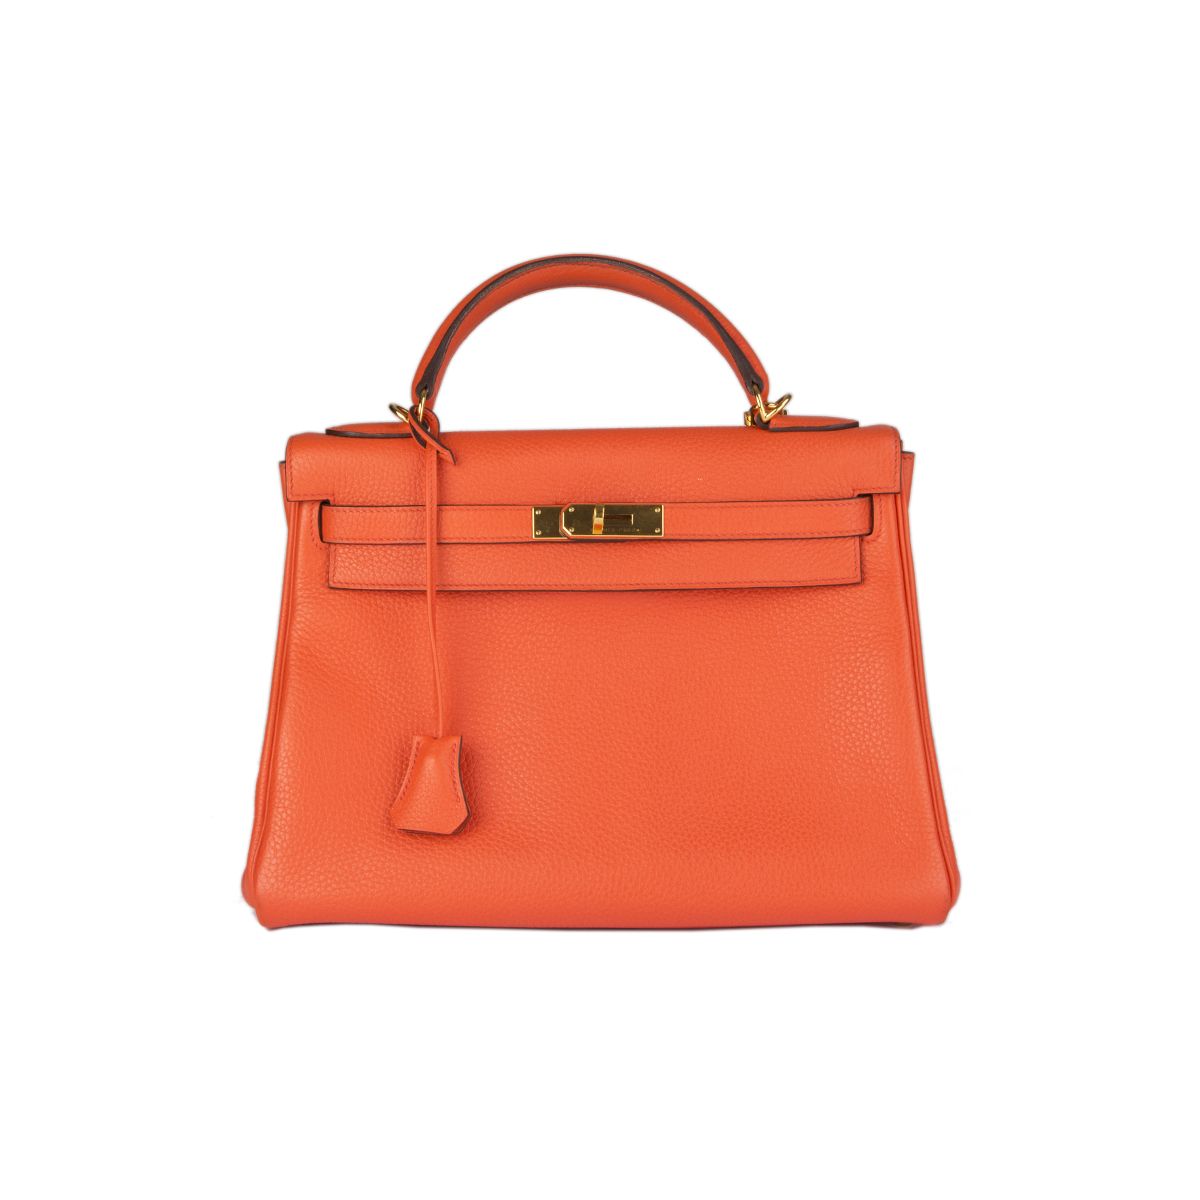 Hermes 32cm Toffee Clemence Leather Gold Plated Kelly Retourne Bag